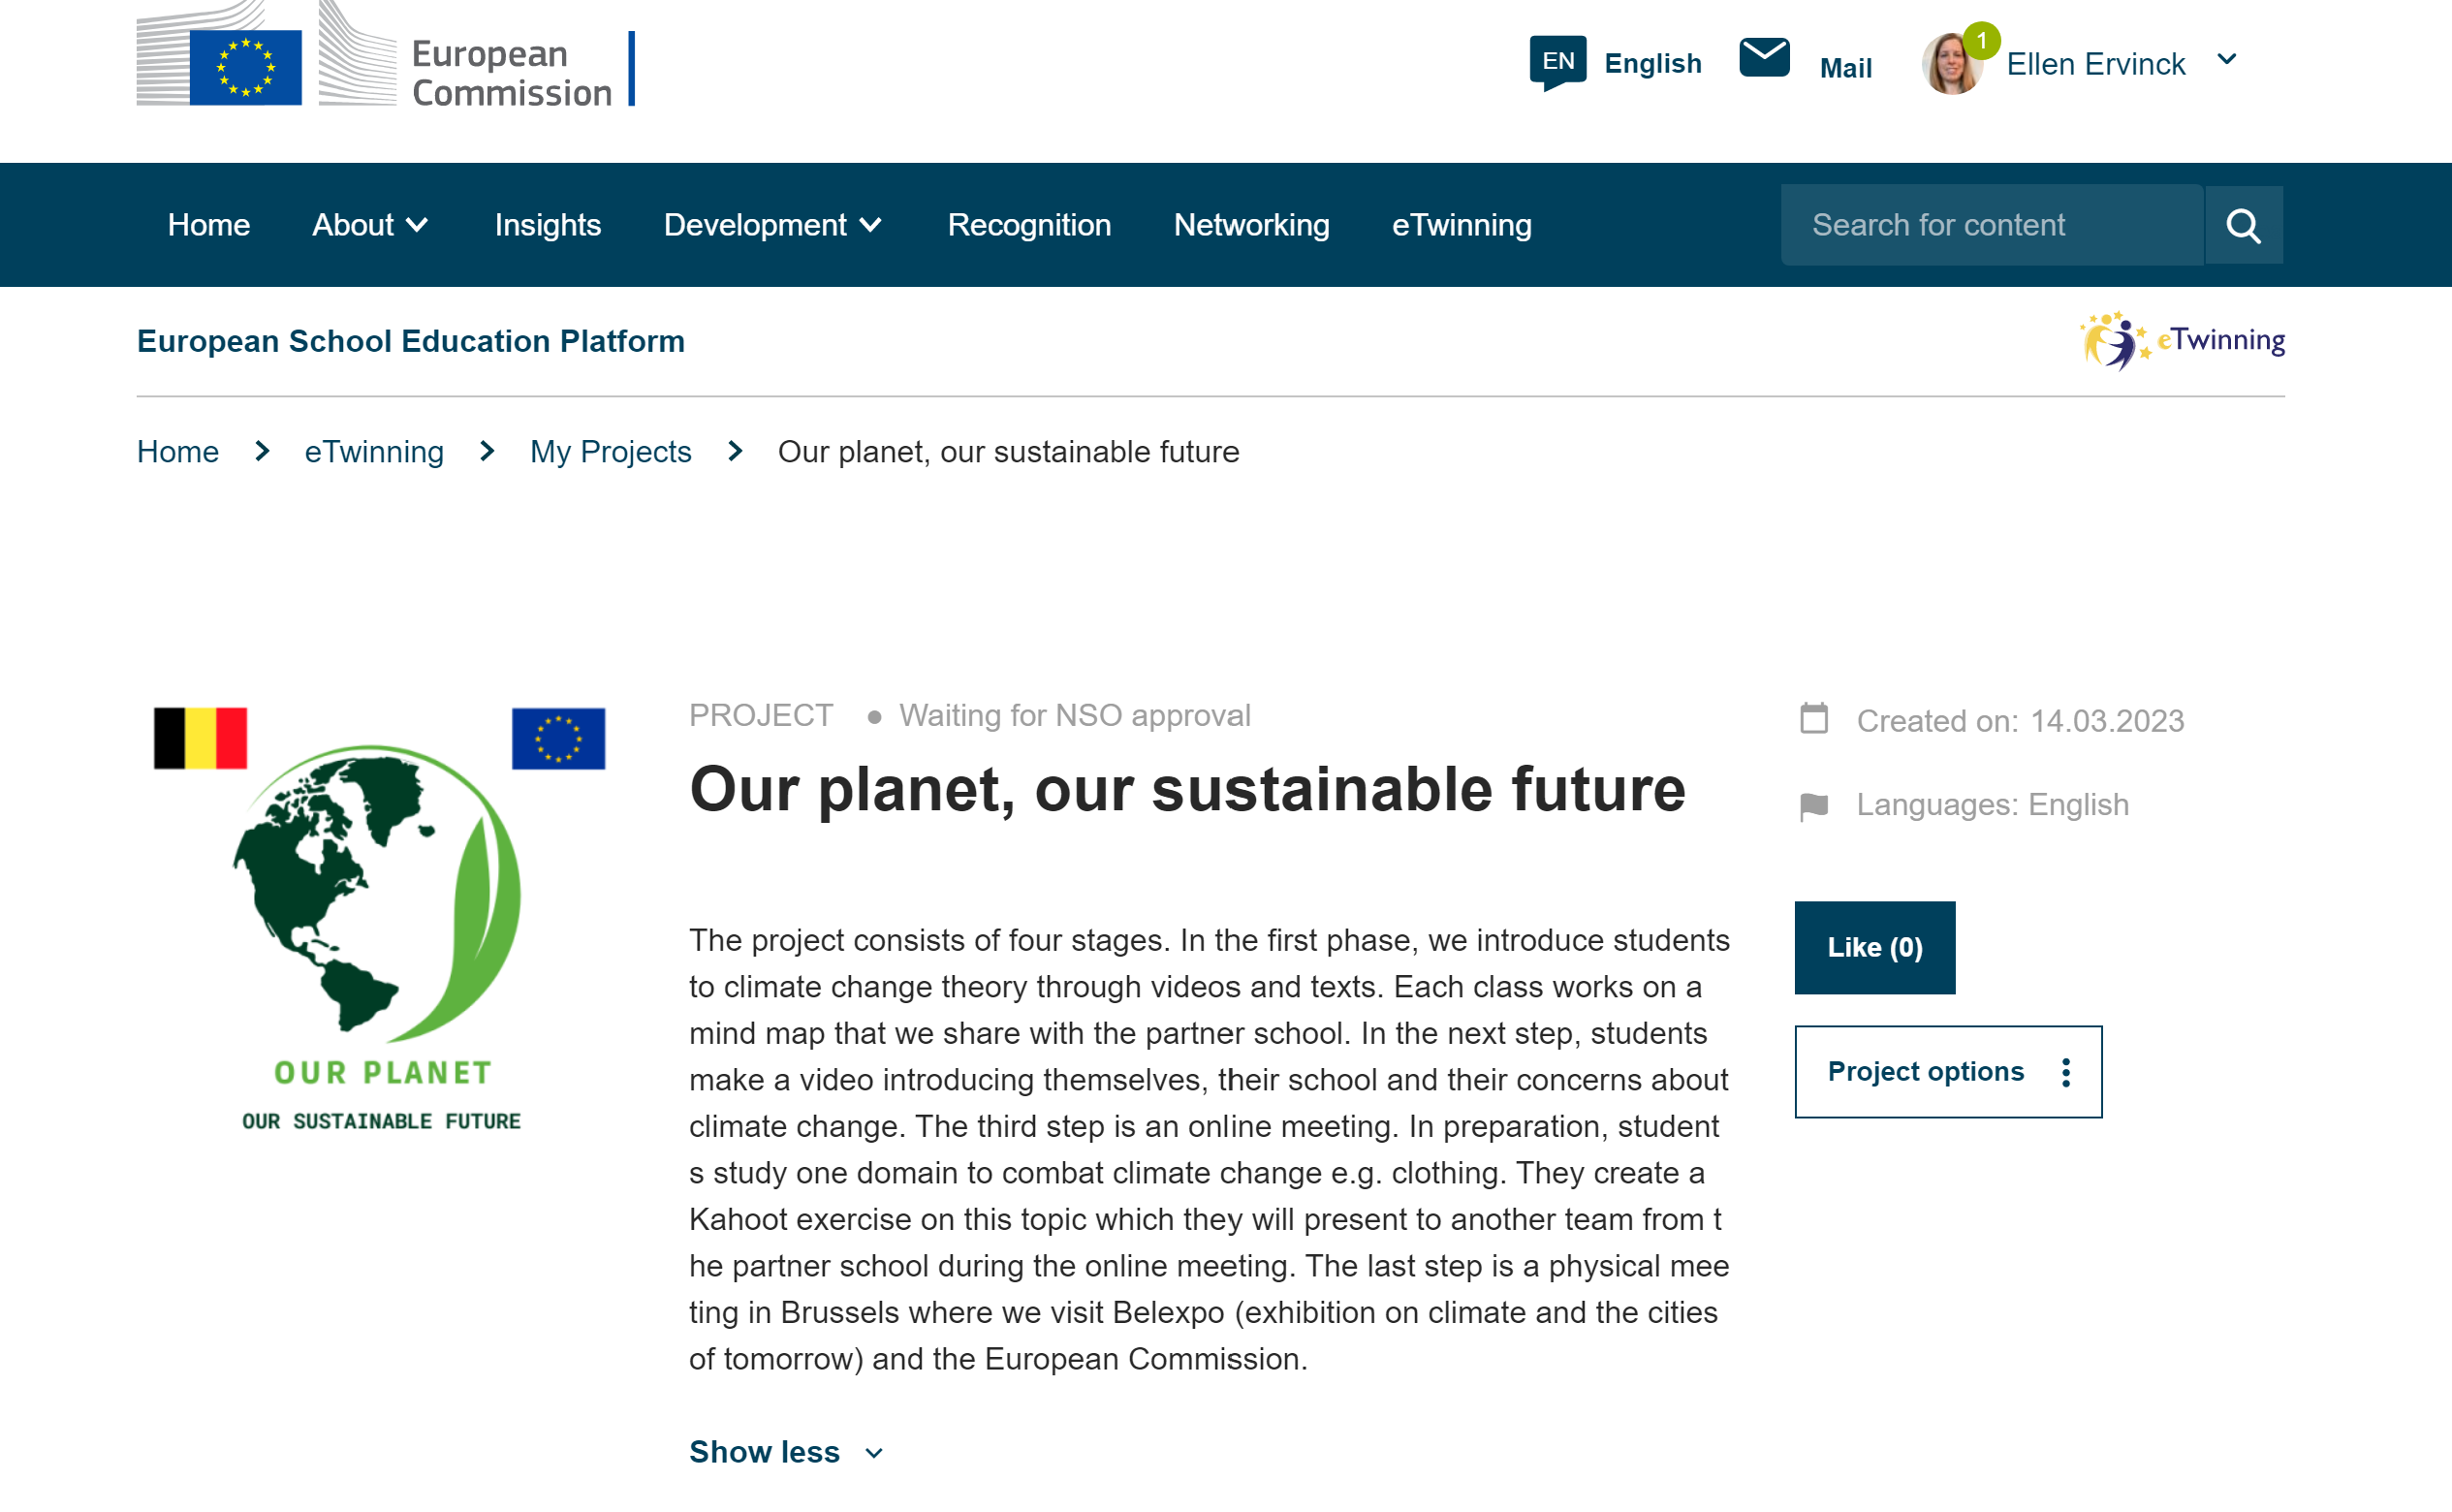 eTwinning Our planet, our sustainable future